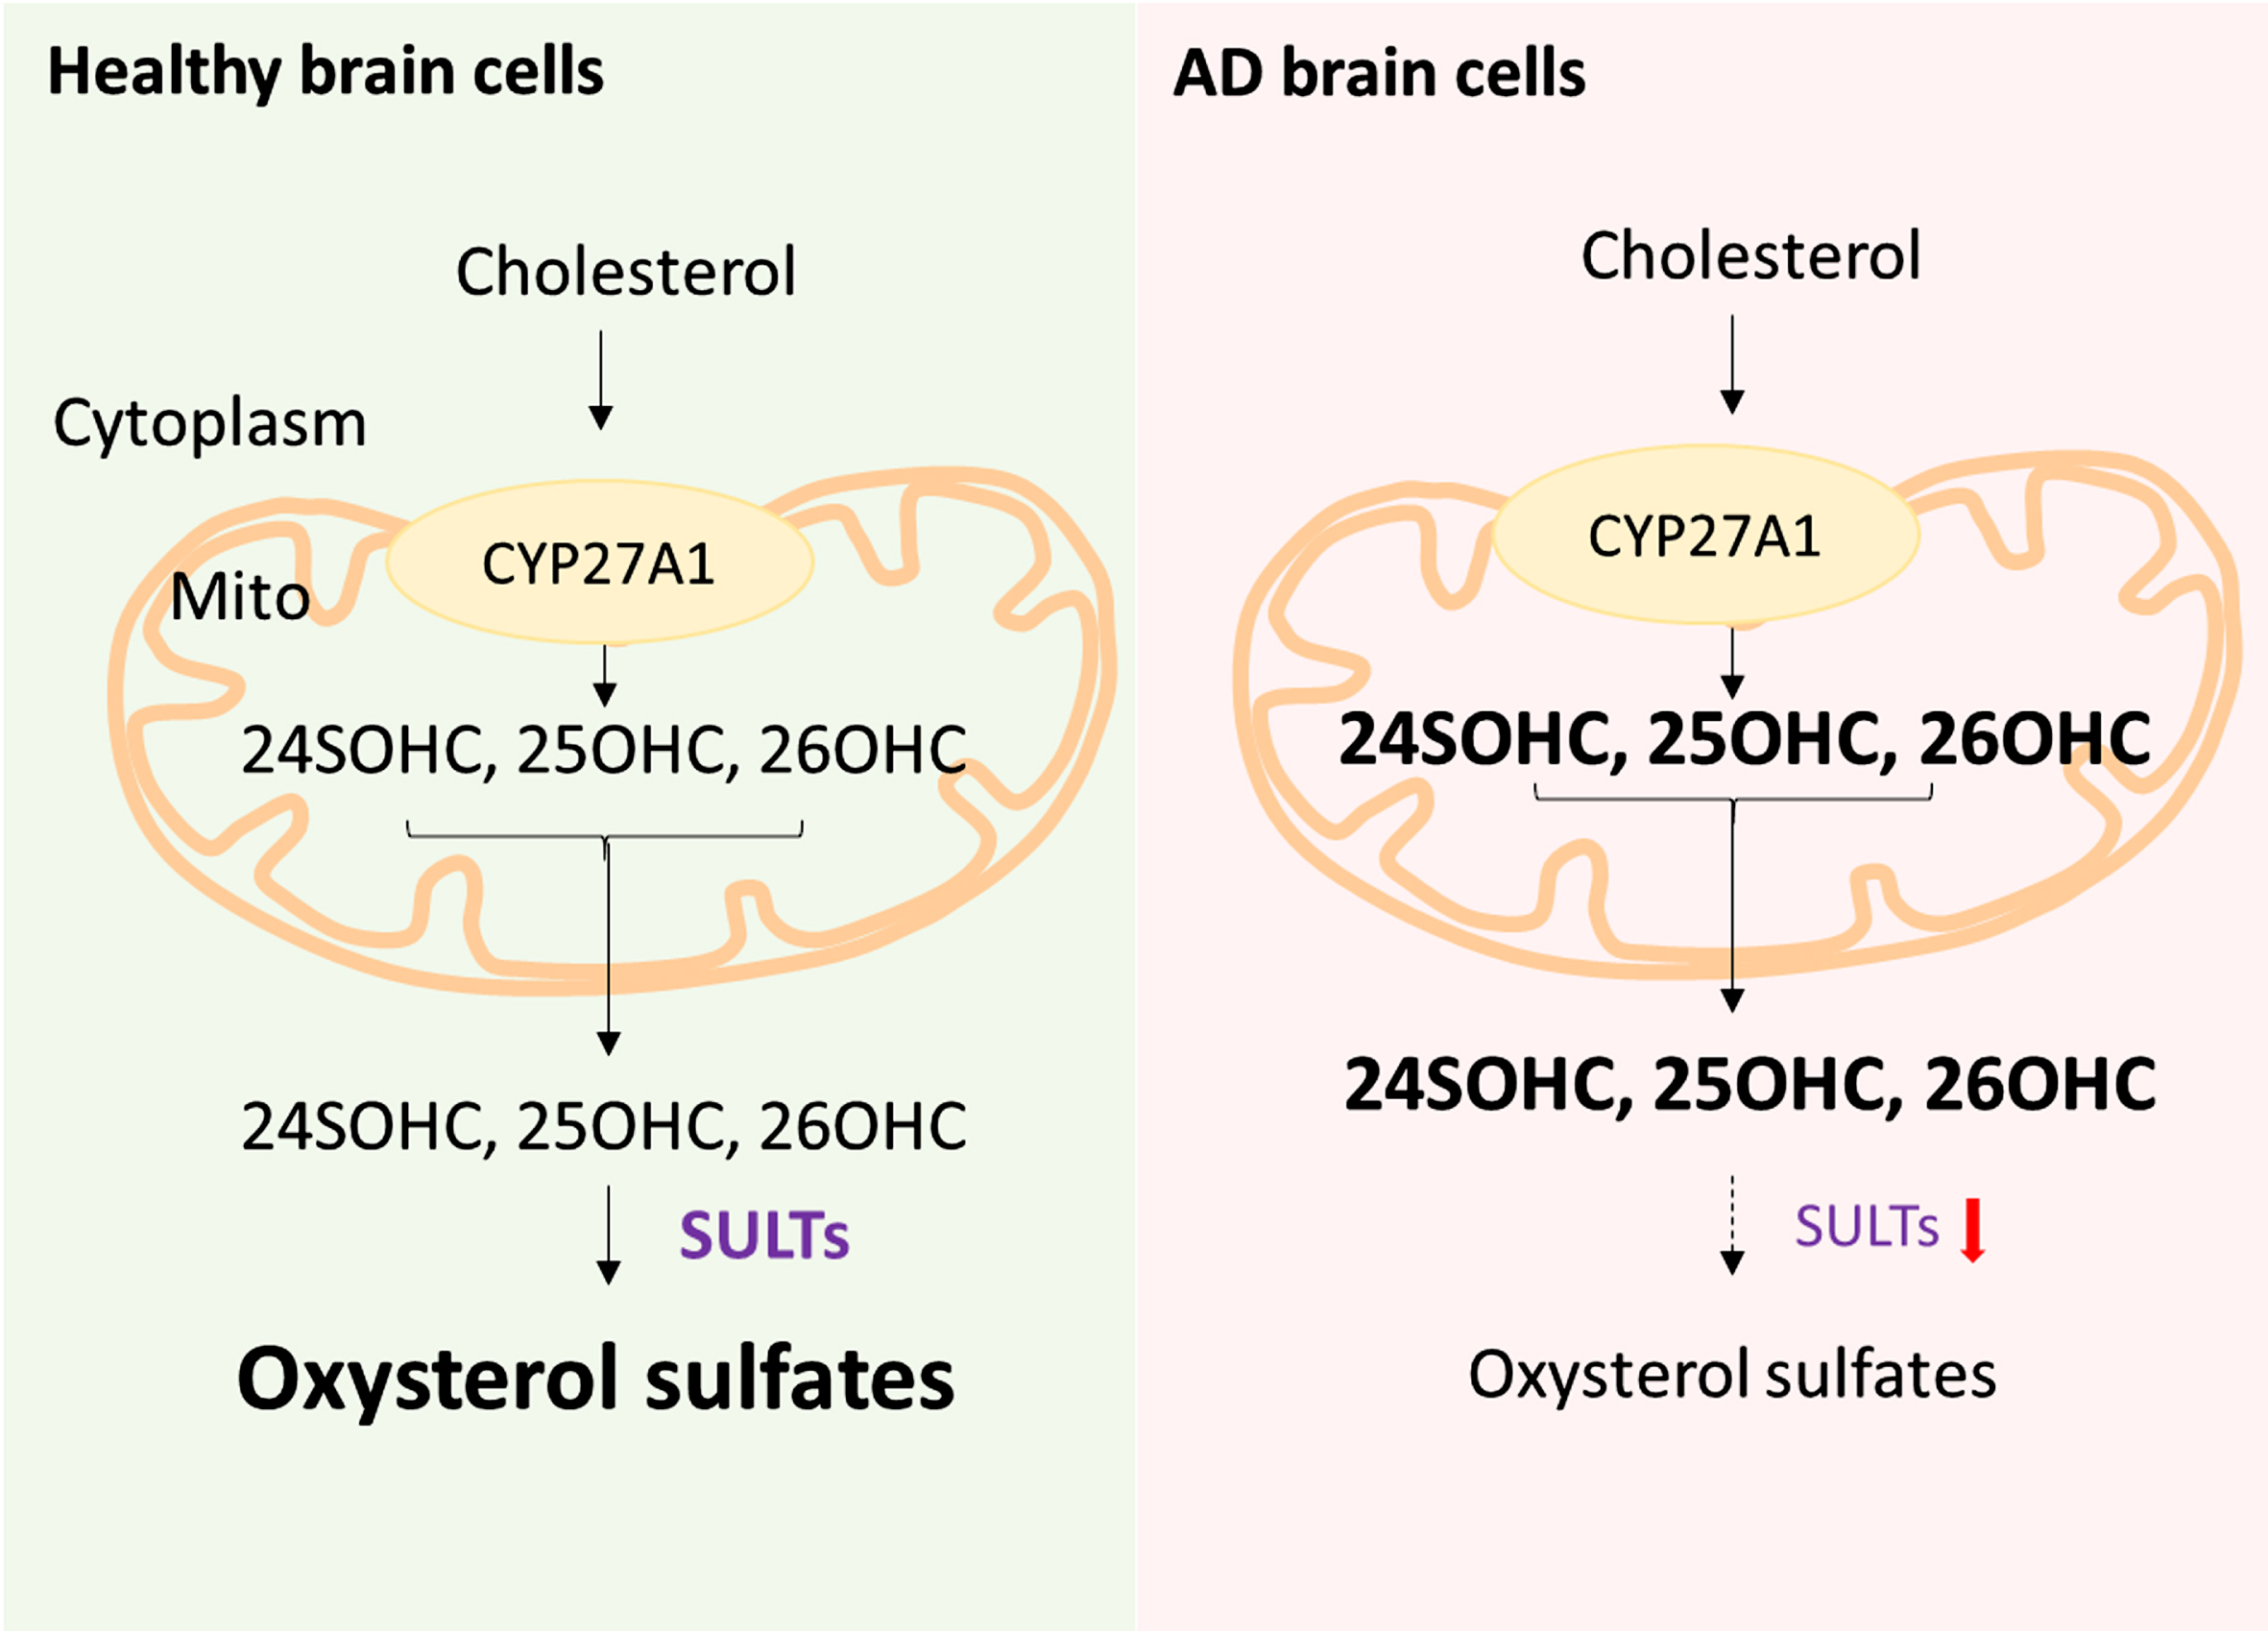 A schematic representing the key steps of mitochondrial oxysterol synthesis and conversion to oxysterol sulfates in cytosol. AD patients are reported to have low levels of brain sulfotransferase (SULT) genes and enzymatic activity [53, 54]. This may result oxysterols accumulation in AD brain cells and mitochondria.